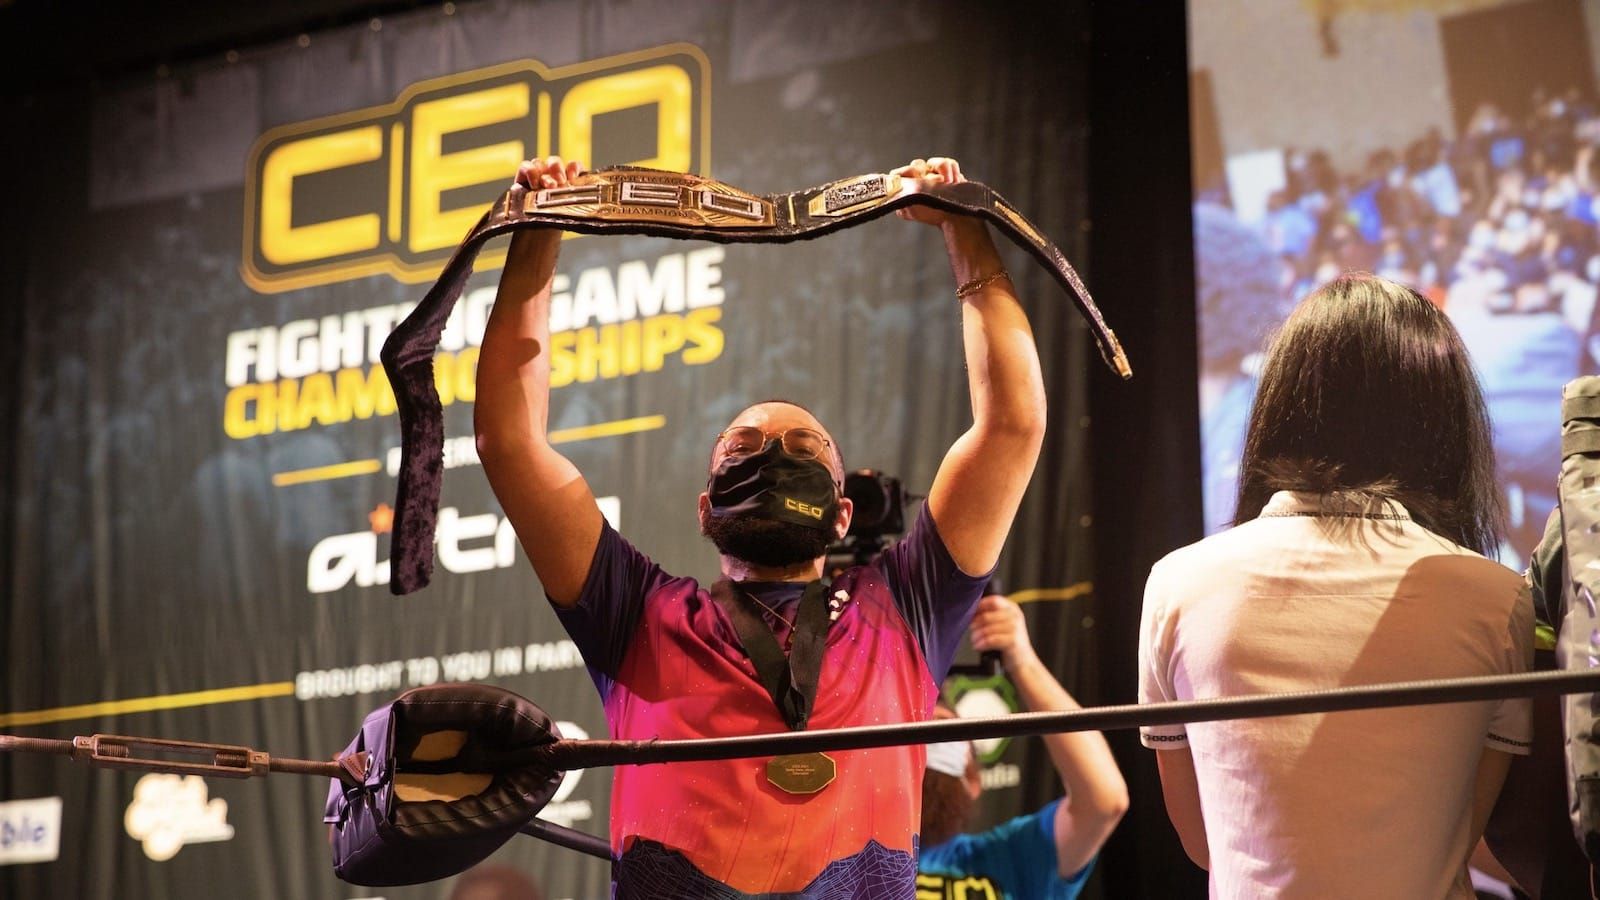 Fighting game player K7 lifts a championship belt above his head with name of tournament "CEO" in the background